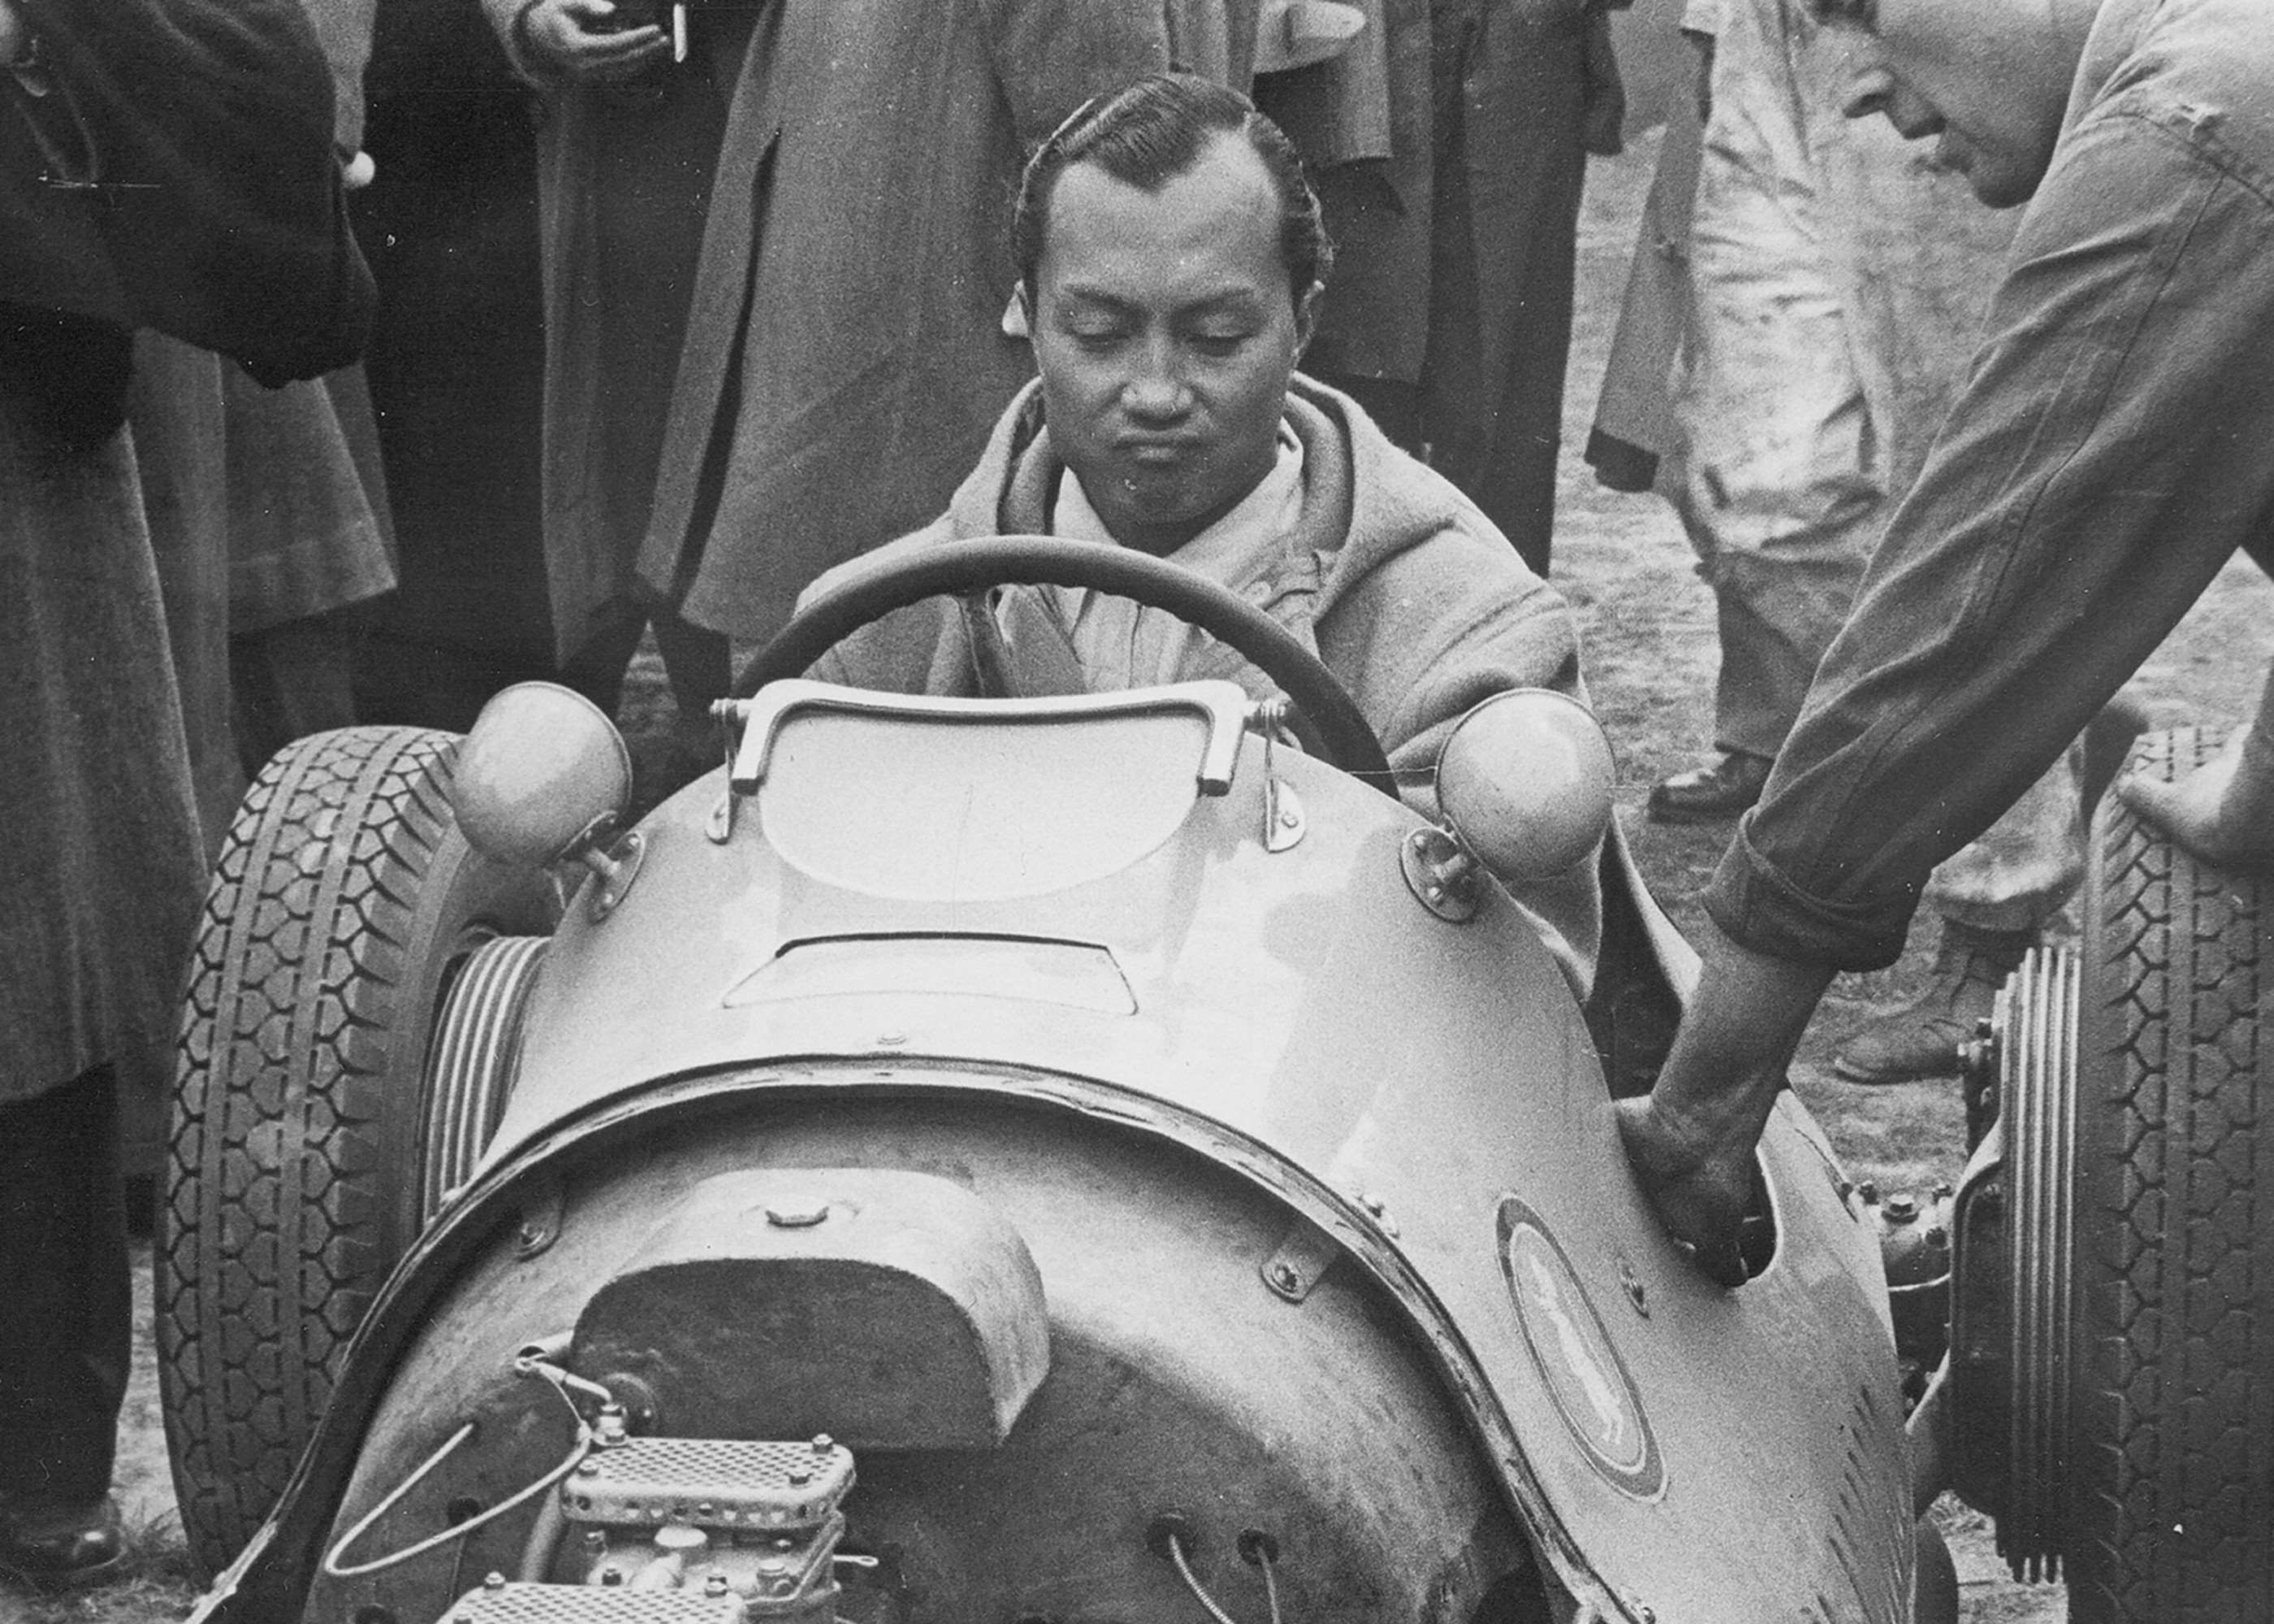 Dapper little Prince - ‘B.Bira’ had his Maserati 4CLT converted with a 4 1/2-litre OSCA V12 engine installed, and won again at Goodwood in 1951